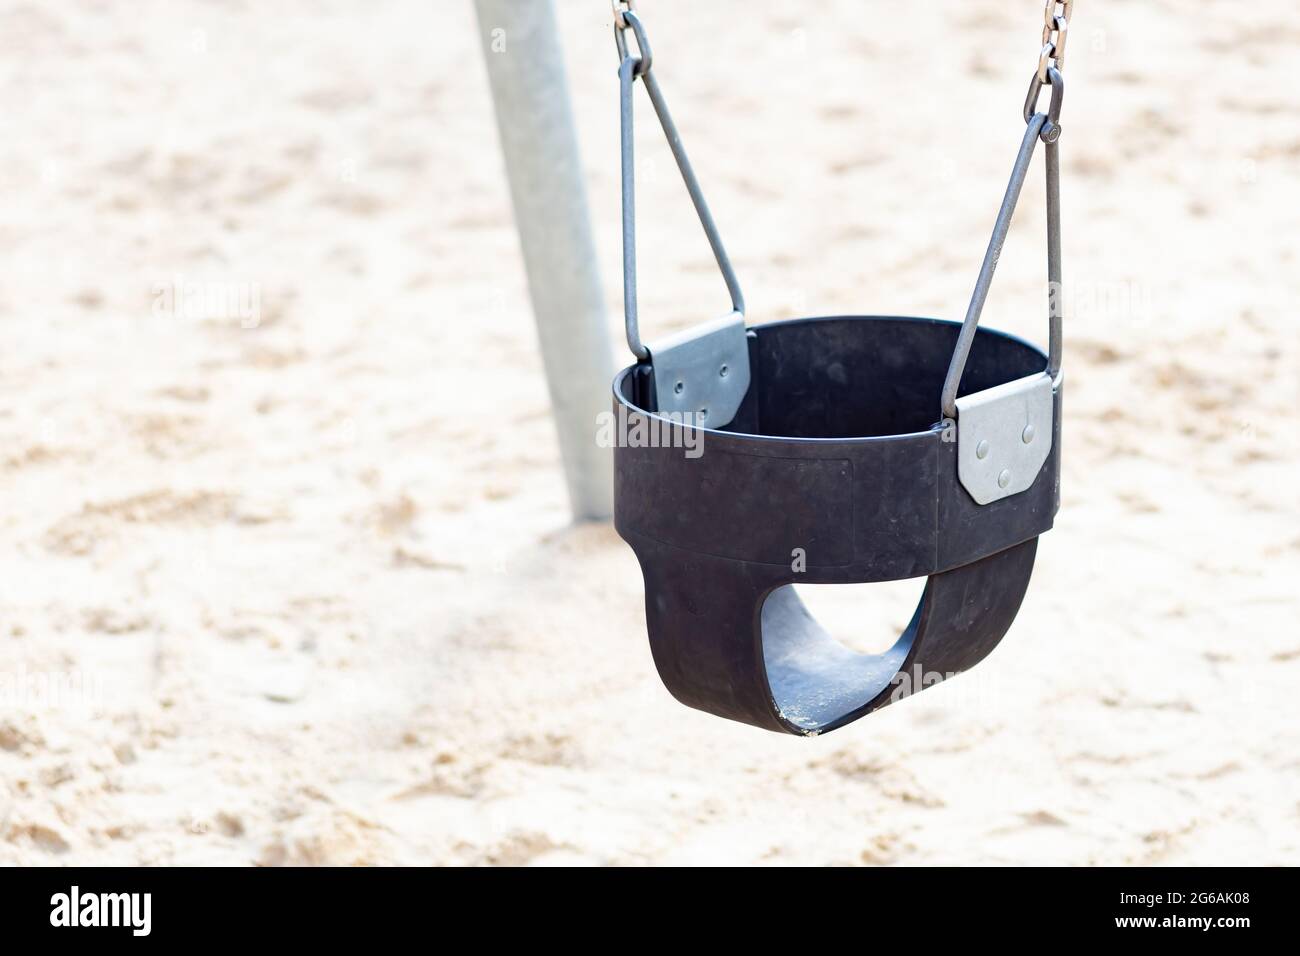 seat of children's swing close-up, place under text Stock Photo